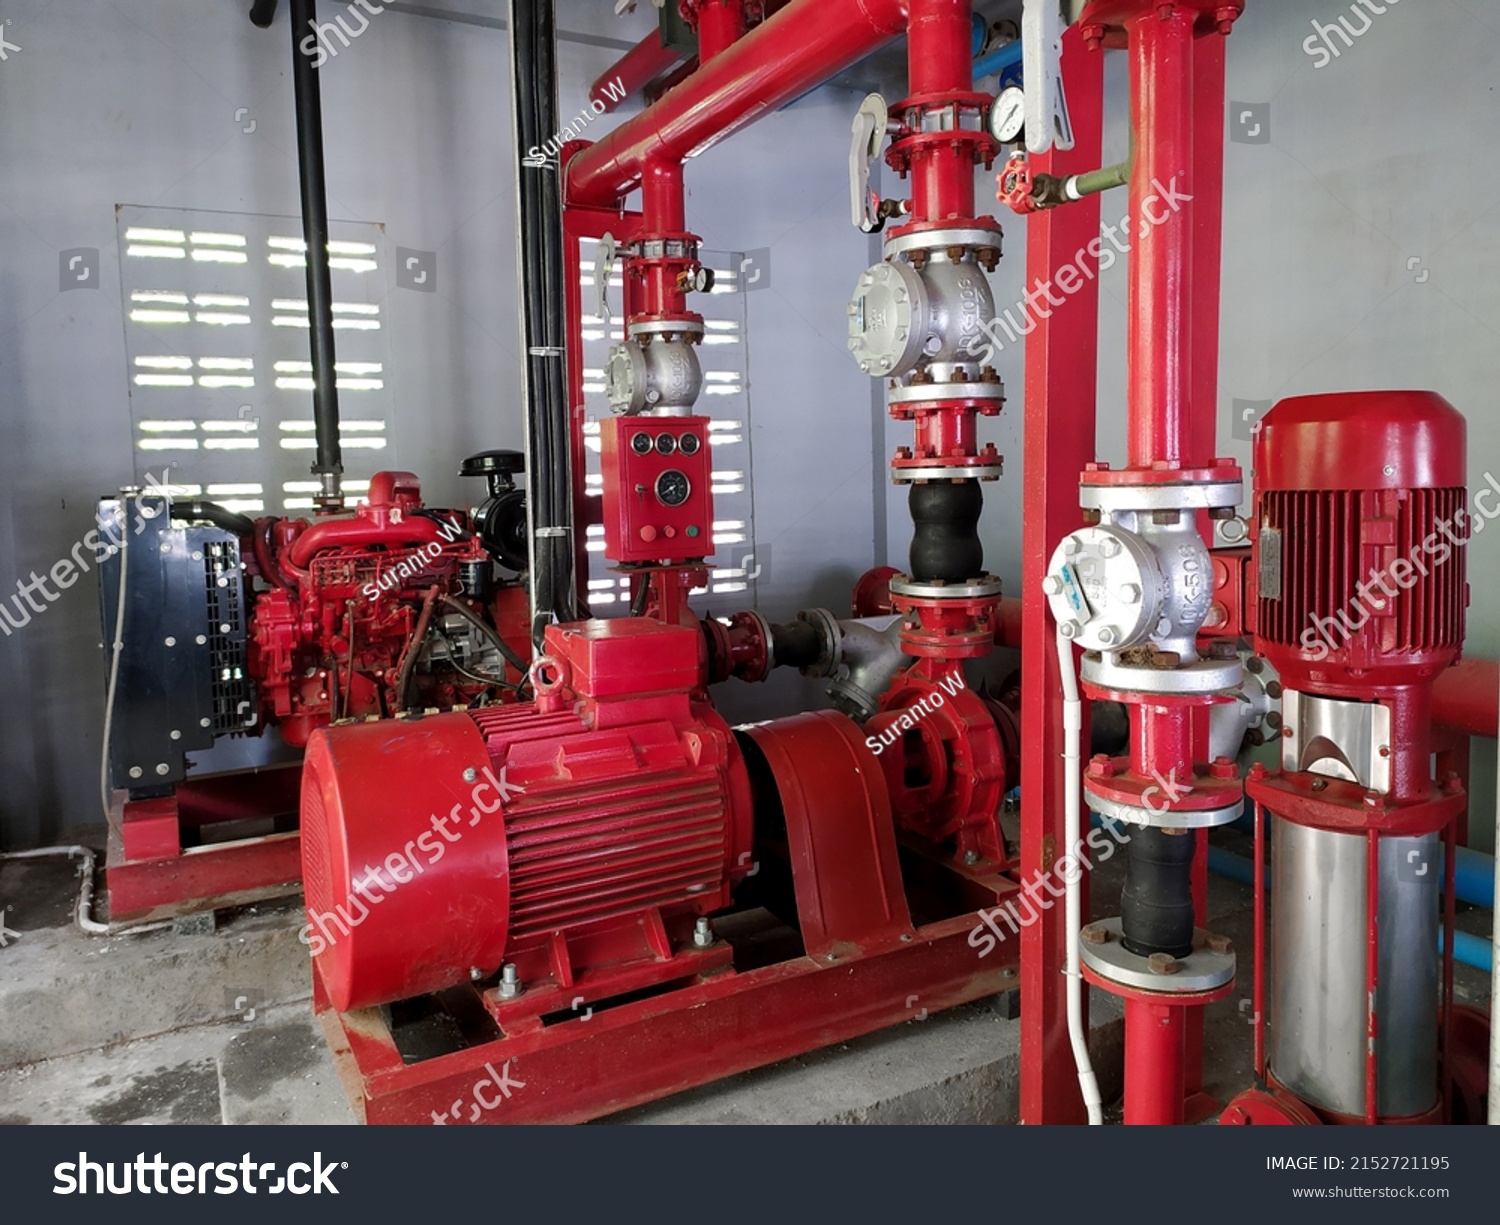 Electric Fire pump and engine fire pump for fire fighting system in industrial. #2152721195